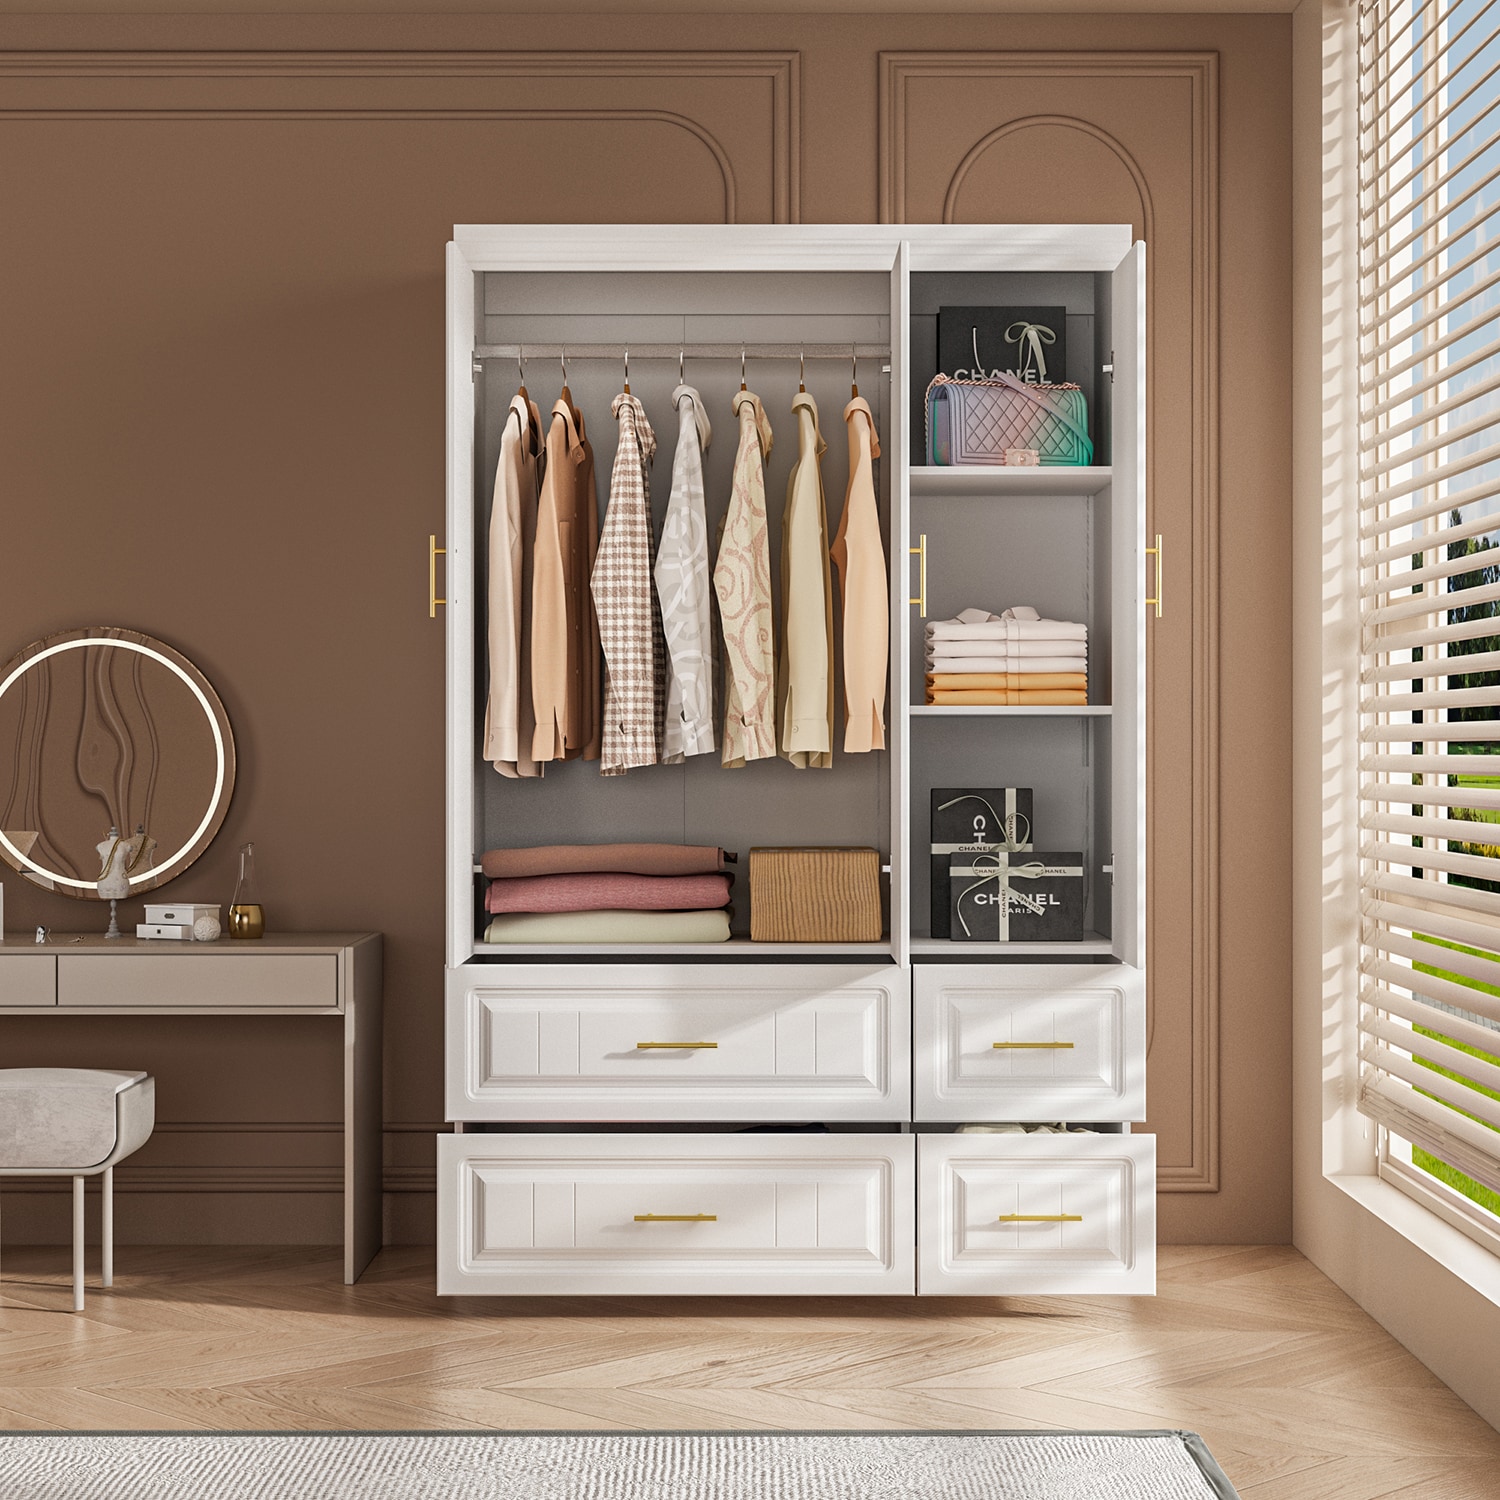 Metal in with Wardrobe Slide Spaces Contemporary FUFU&GAGA 3-Door at and Rails Finish, Multiple department Drawers White 4 Armoires - the Closet Storage